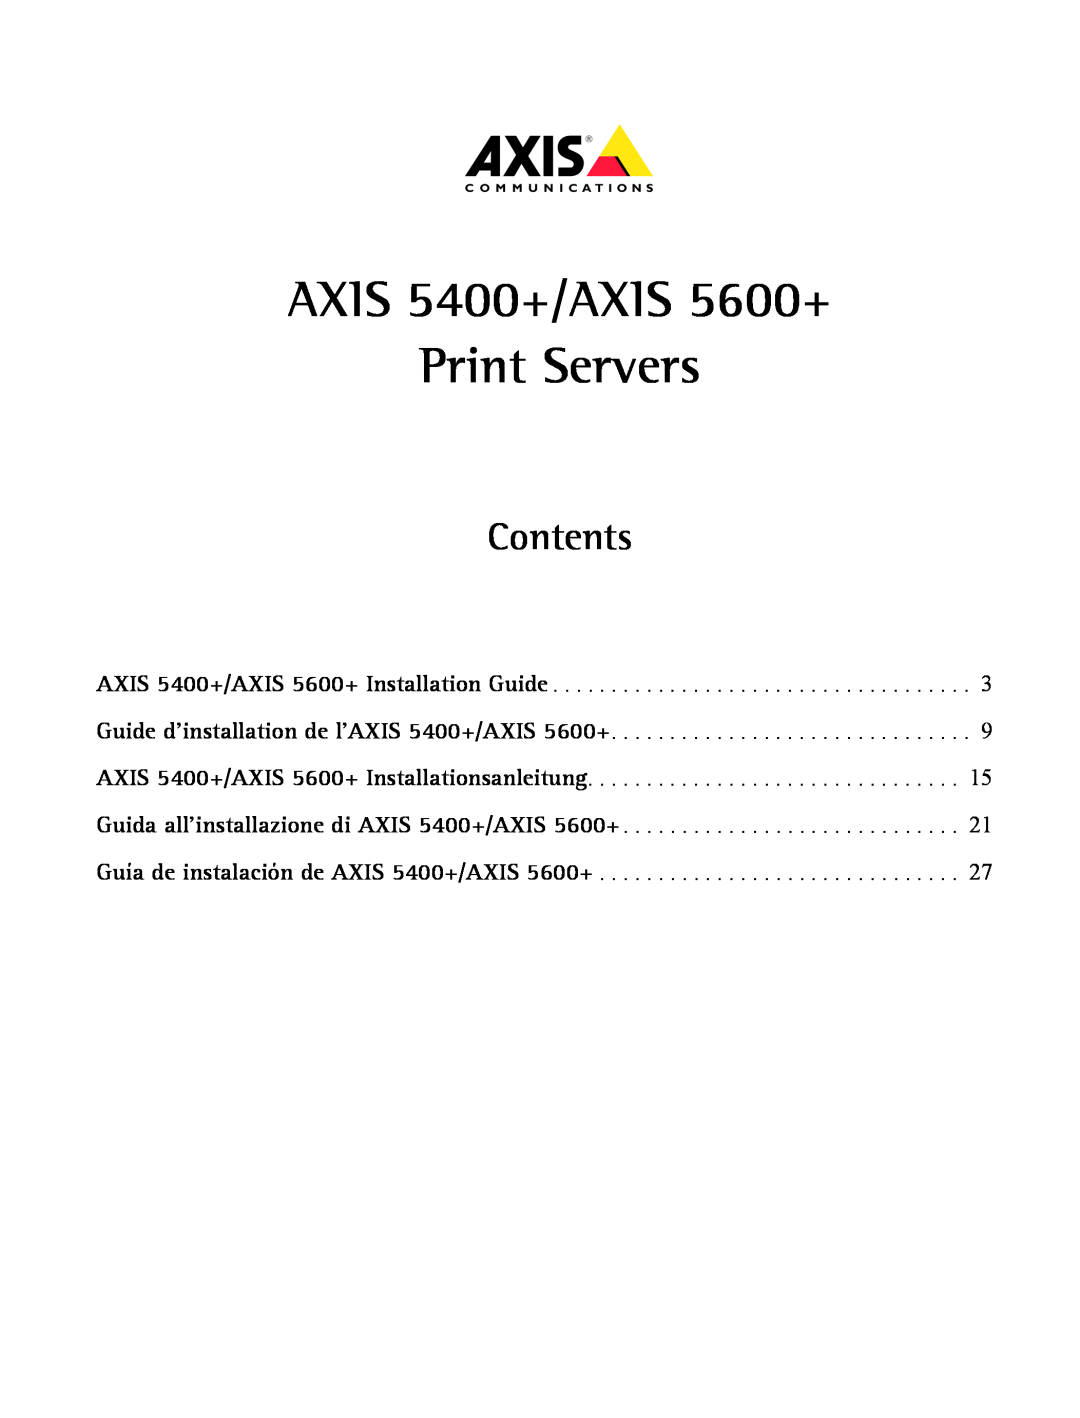 Axis Communications manual Contents, AXIS 5400+/AXIS 5600+ Print Servers 